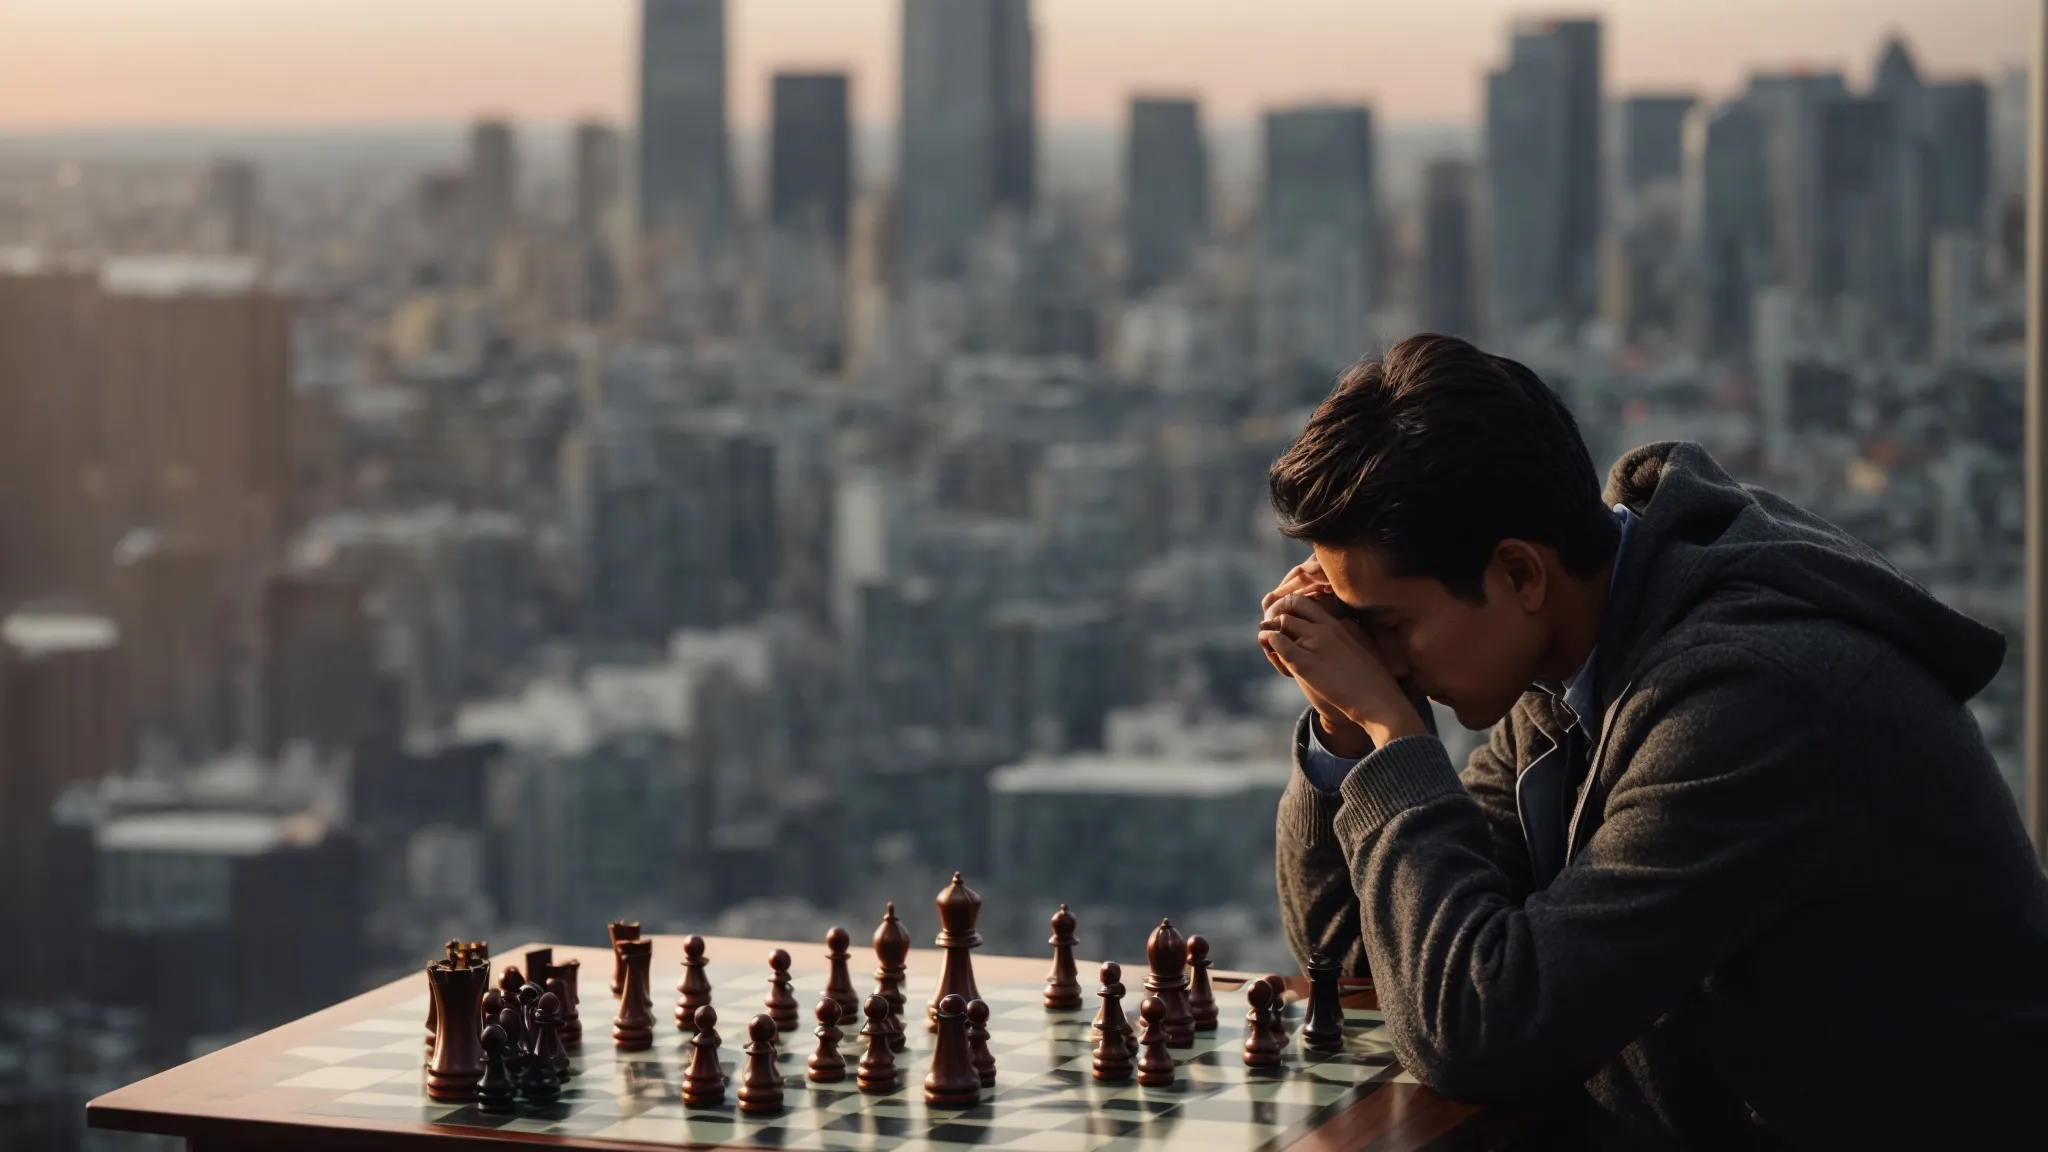 a chess player contemplatively making a strategic move on a chessboard against a blurred city skyline backdrop.